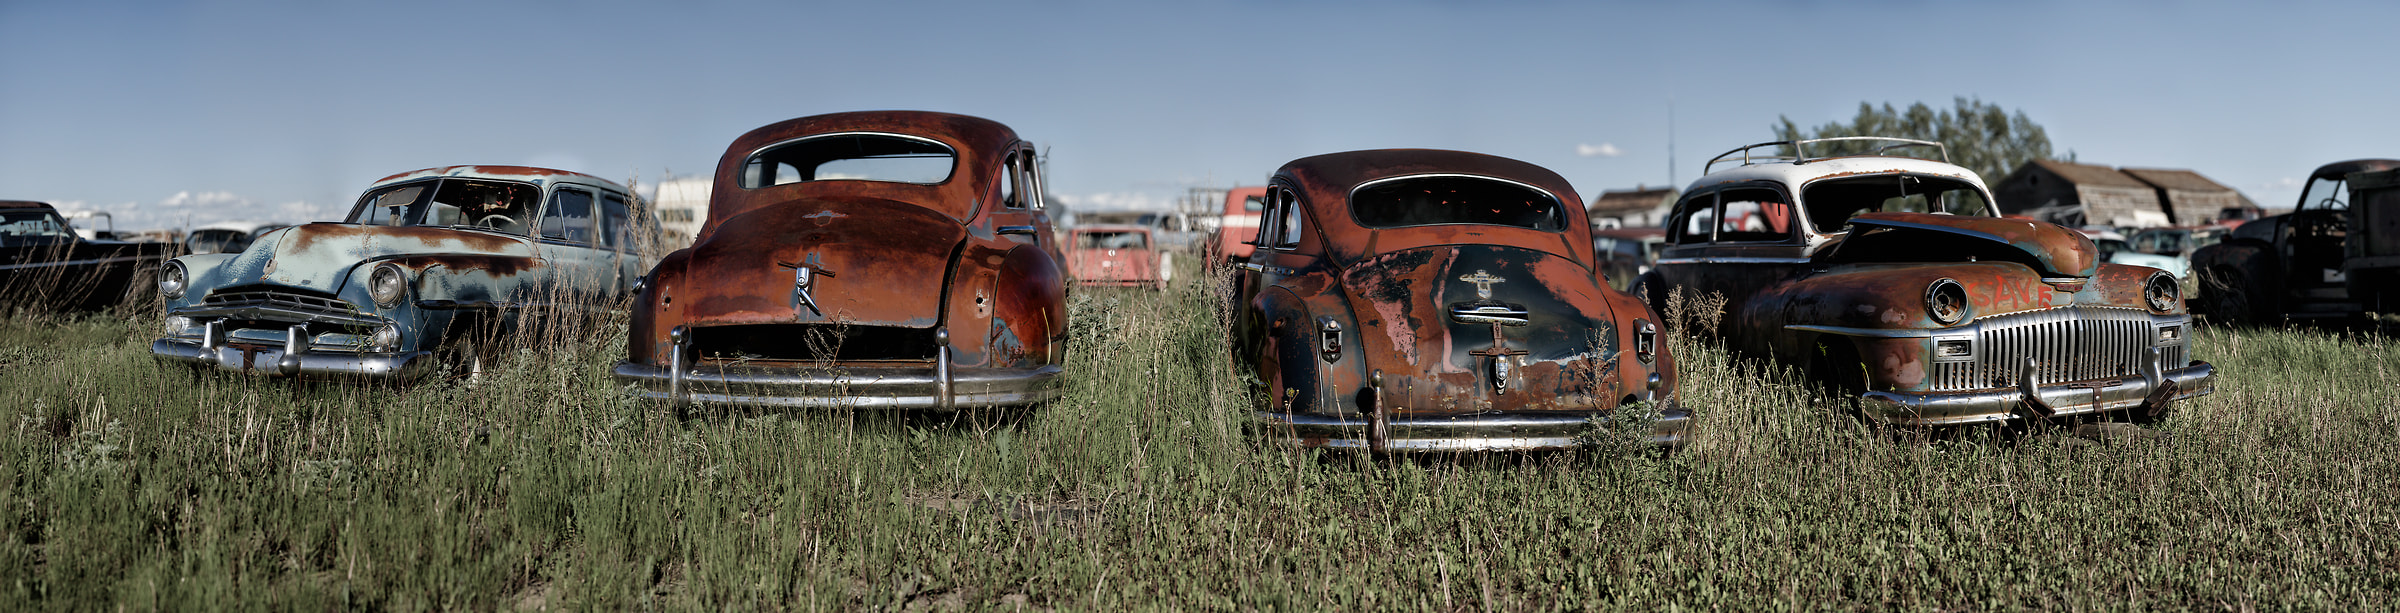 2,880 megapixels! A very high resolution, large-format VAST photo print of abandoned cars in a junkyard; photograph created by Scott Dimond in 